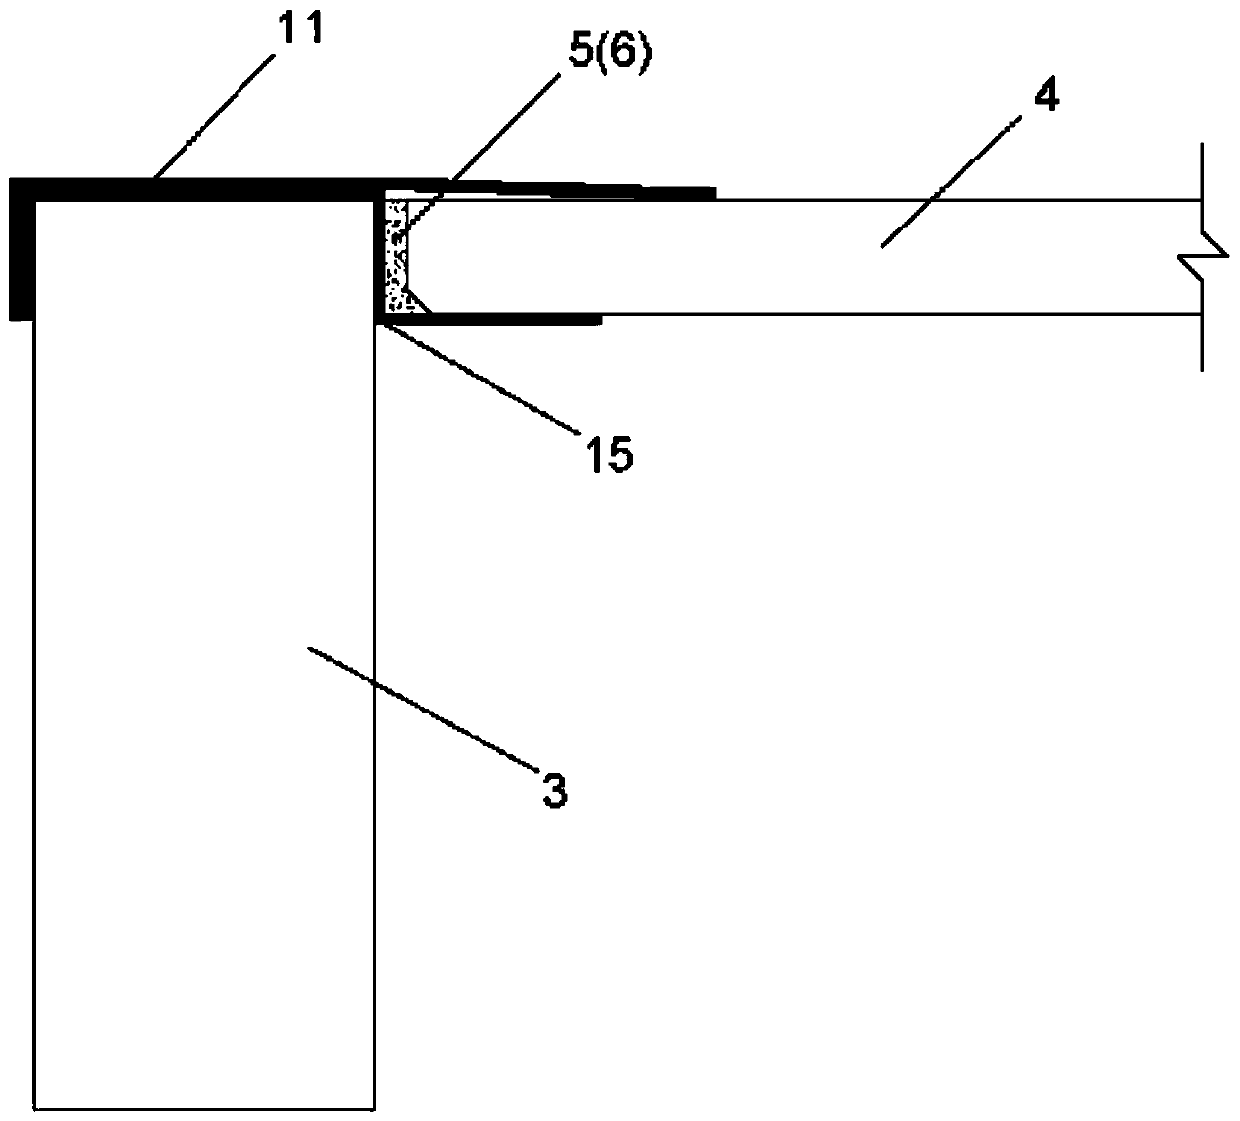 FRP sheet connecting structure of prefabricated concrete beam and slab system and method